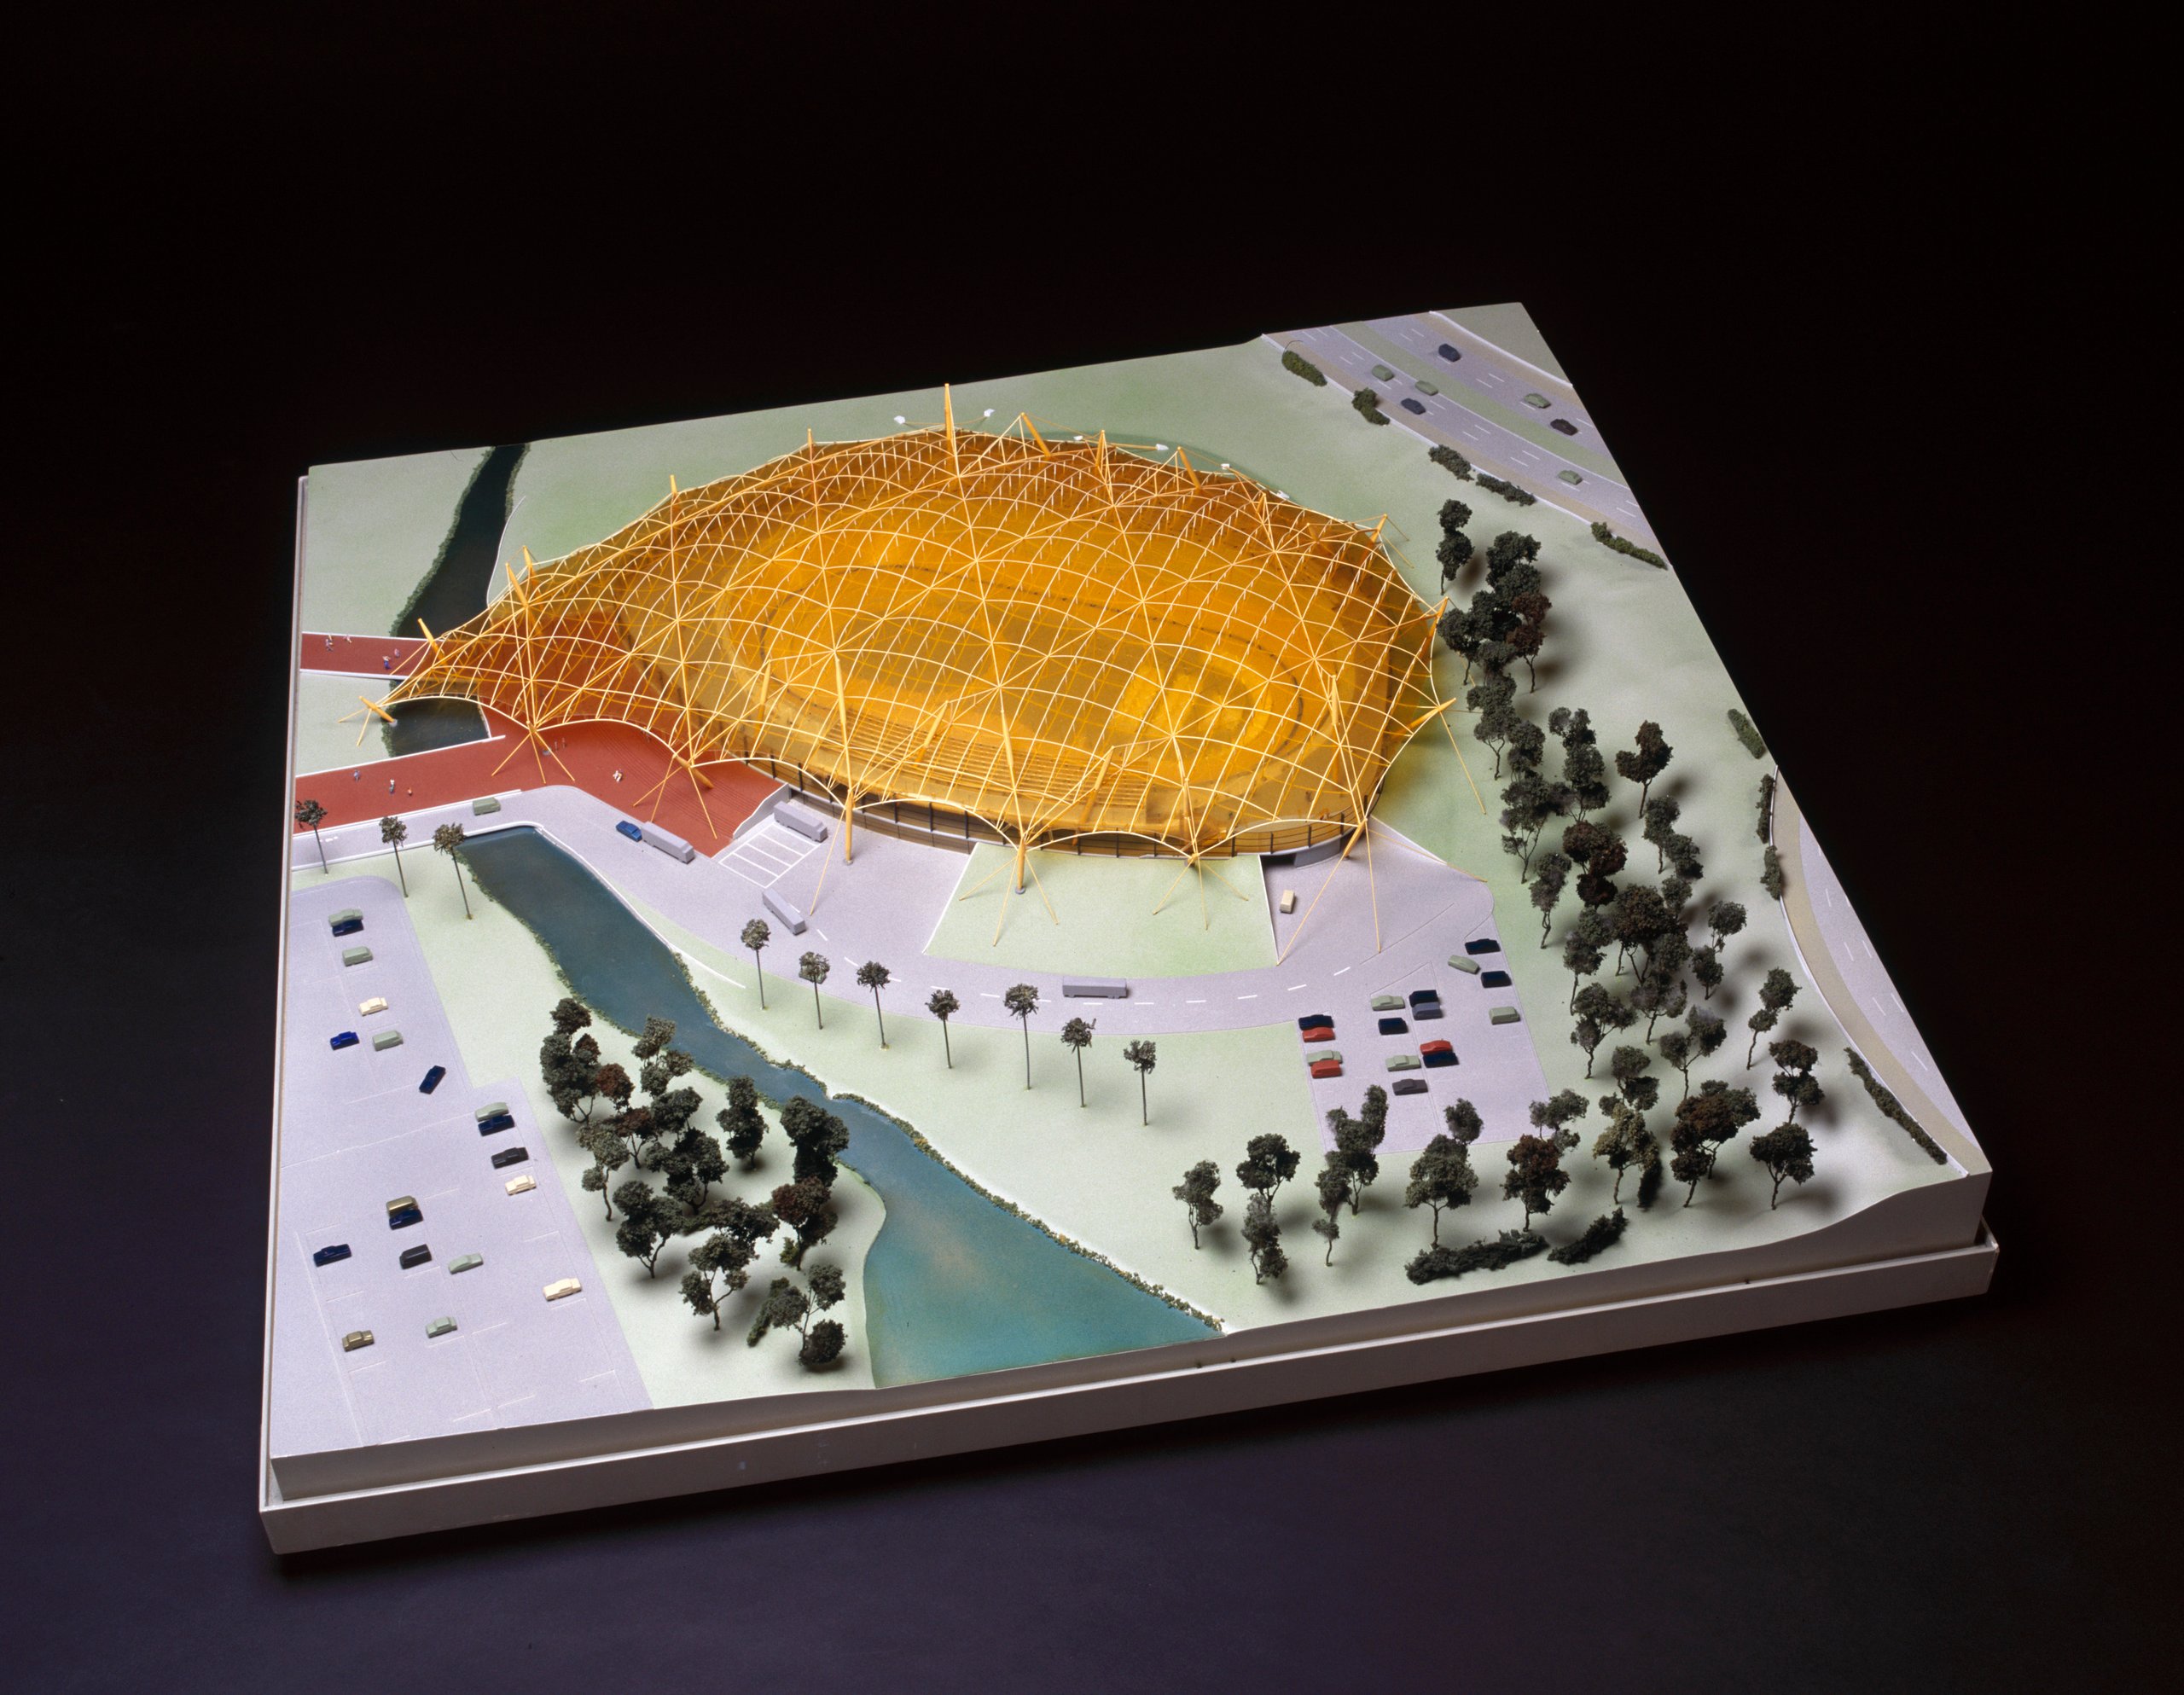 Velodrome model by Paul Ryder and Paula Valsamis